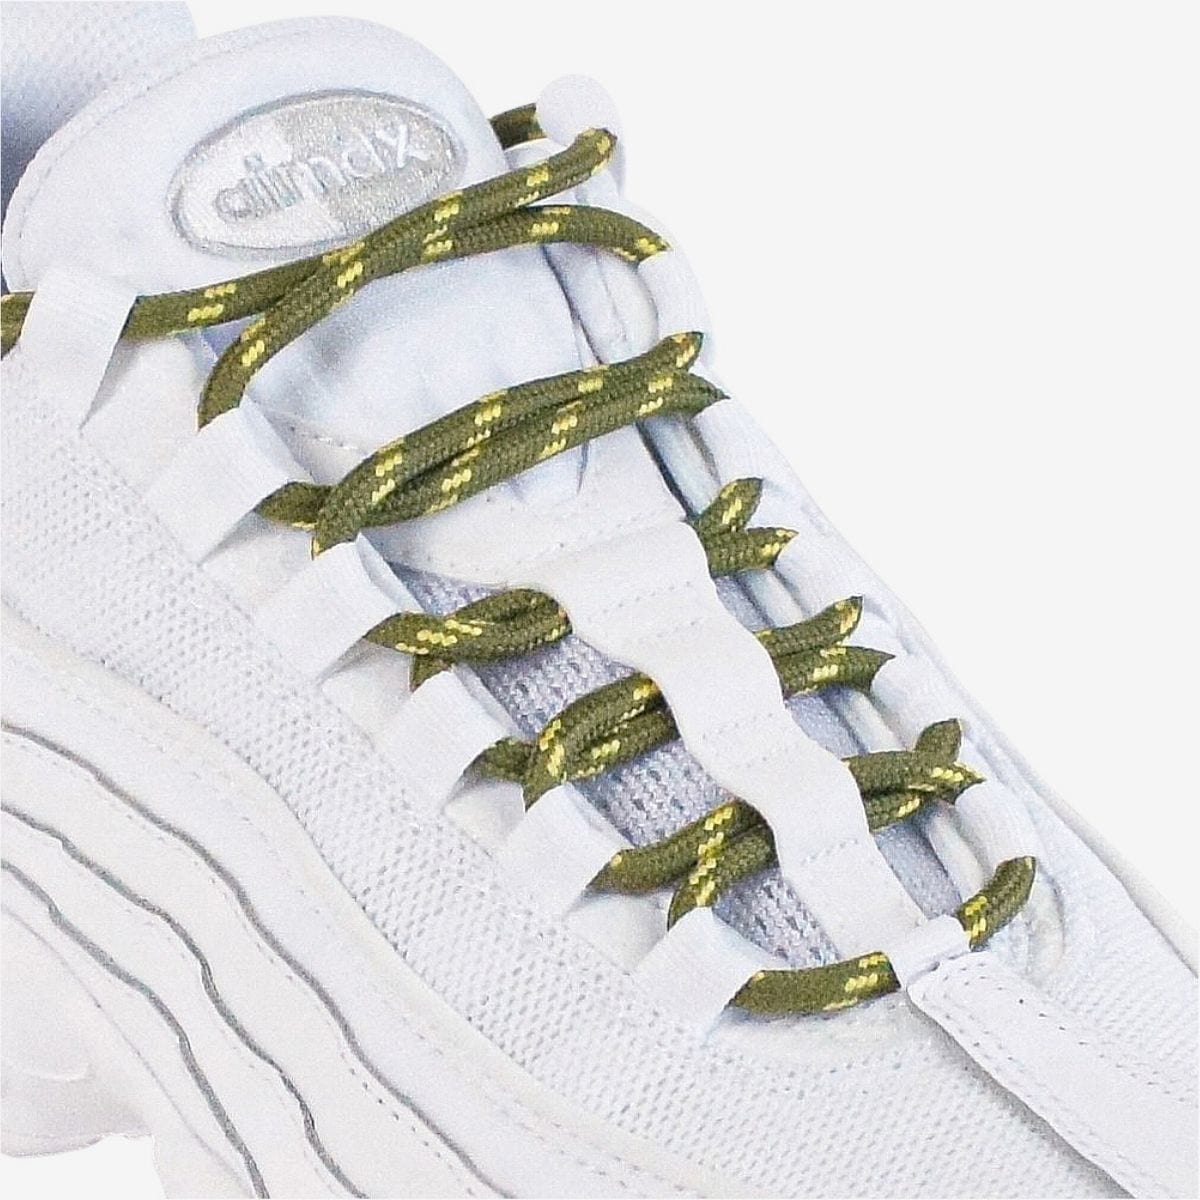 walking-shoe-laces-online-in-australia-colour-army-green-and-yellow